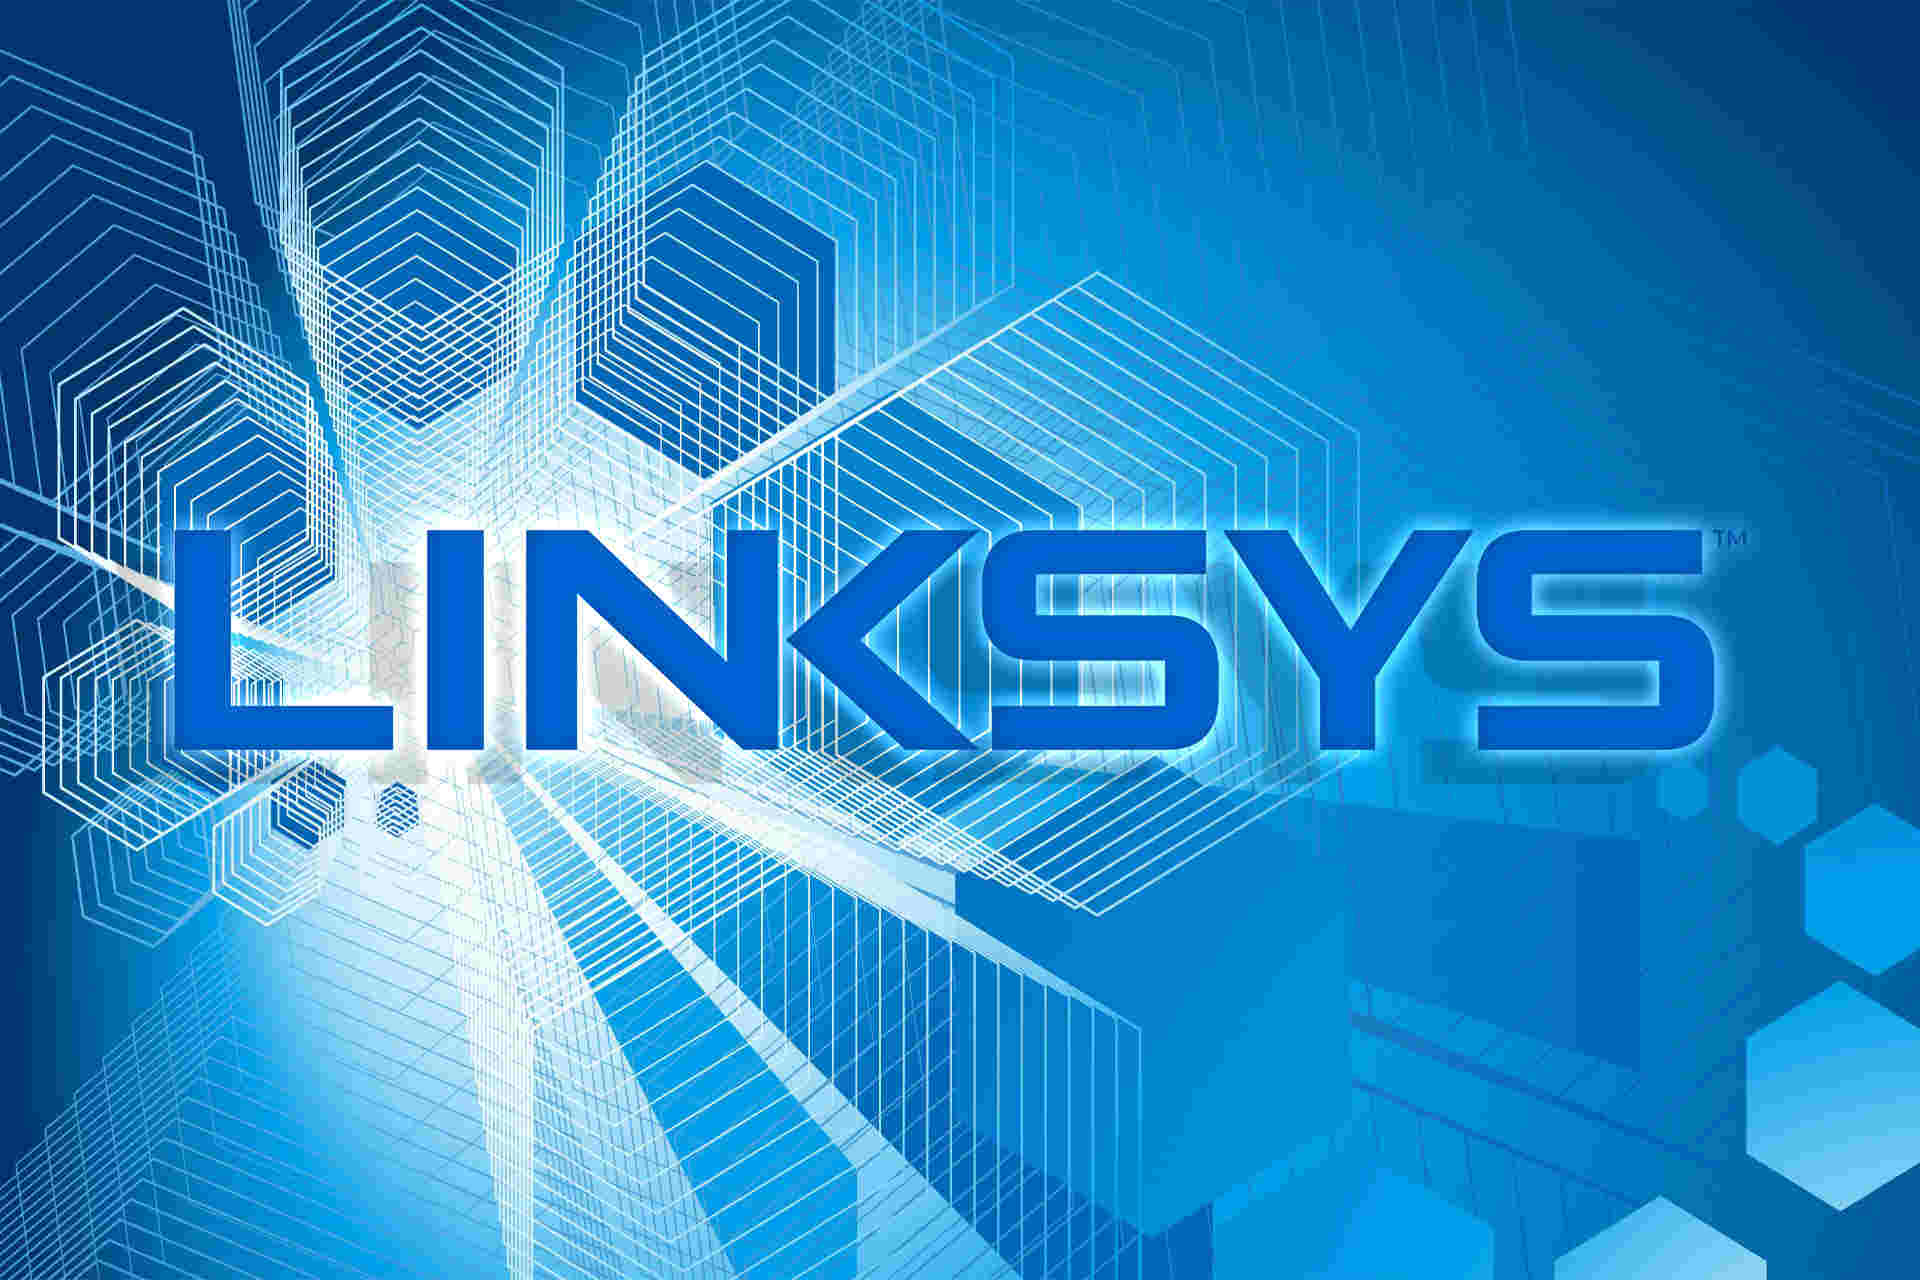 Best Linksys routers to buy